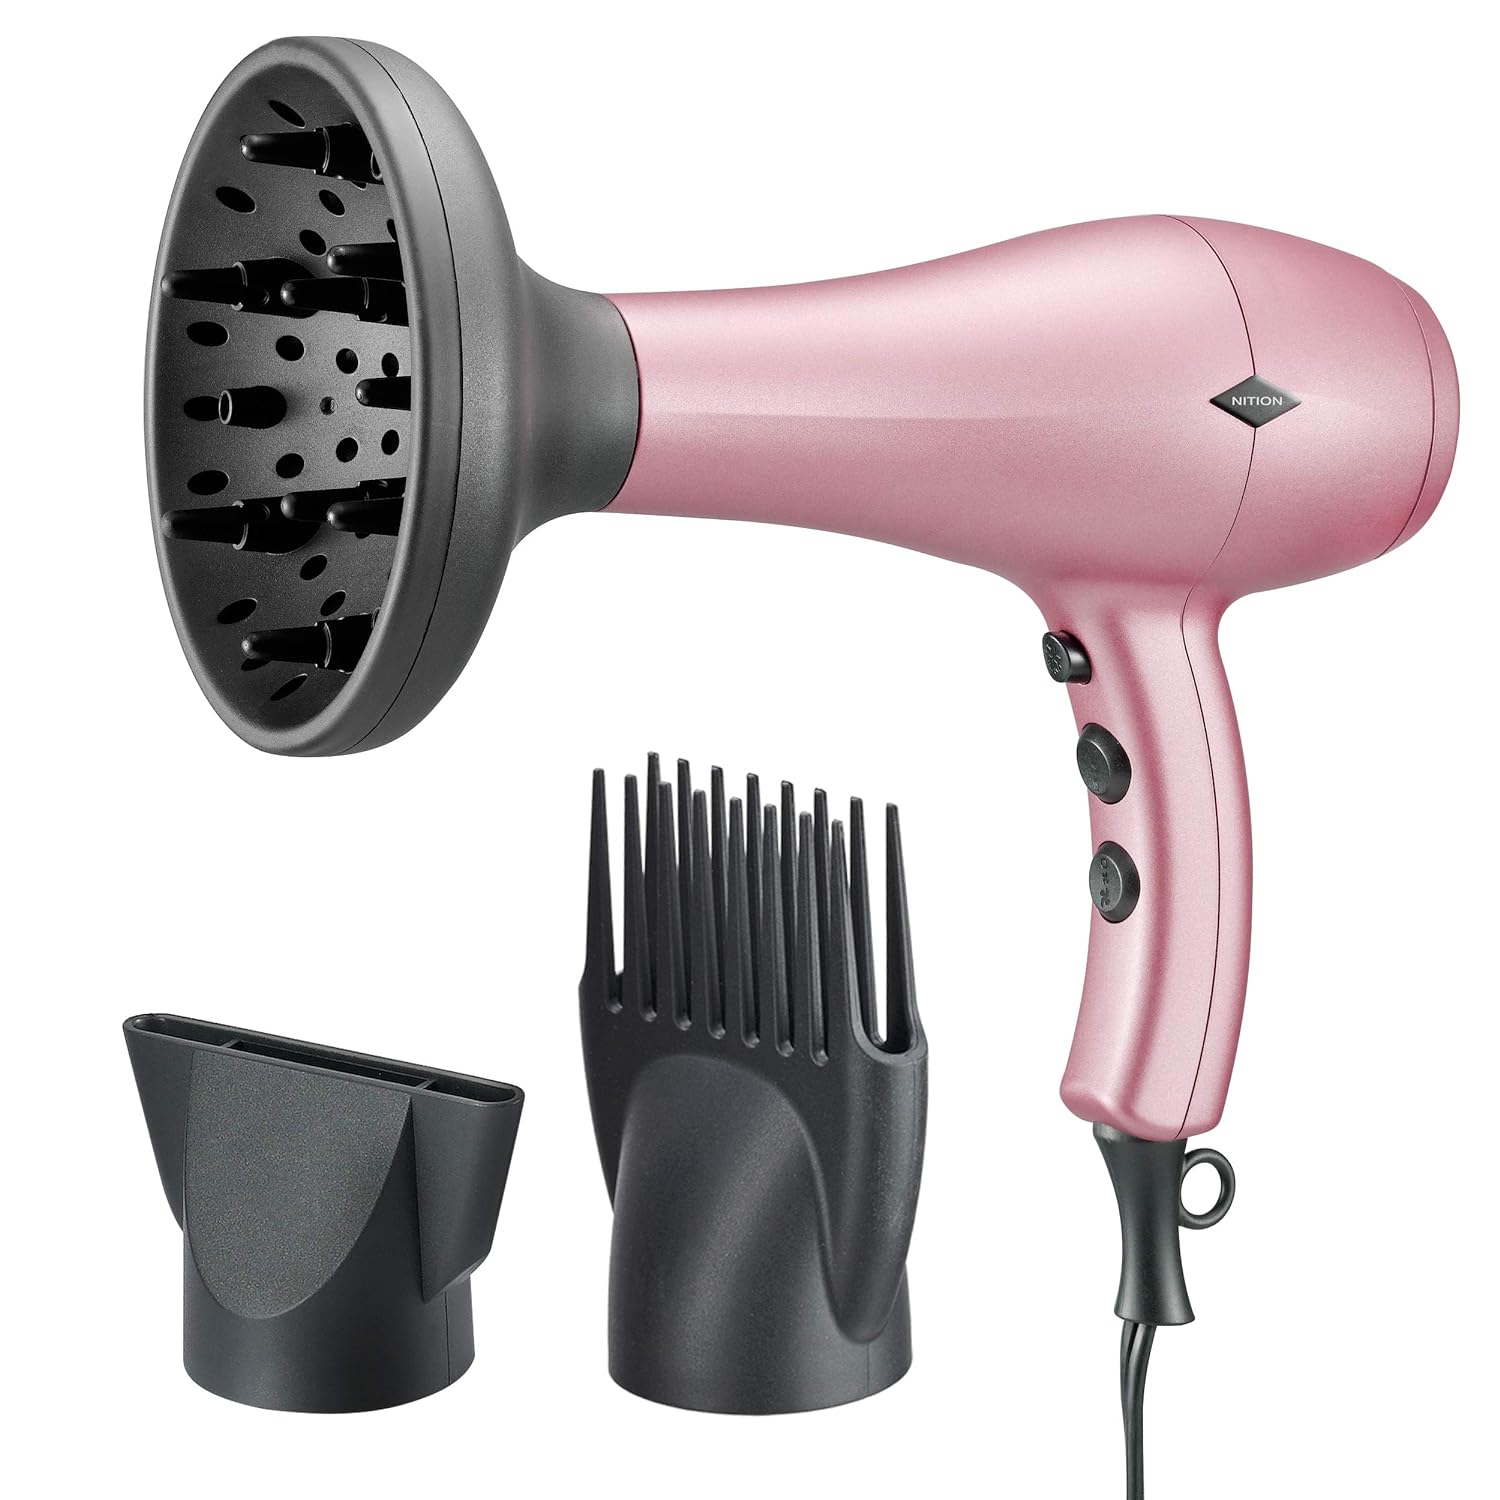 NITION Negative Ions Ceramic Hair Dryer with Diffuser Attachment,Ionic Blow Dryer Quick Drying,1875 Watt 2 Speed / 3 Heat Settings,Cool Shot Button,Lightweight,Rose Pink